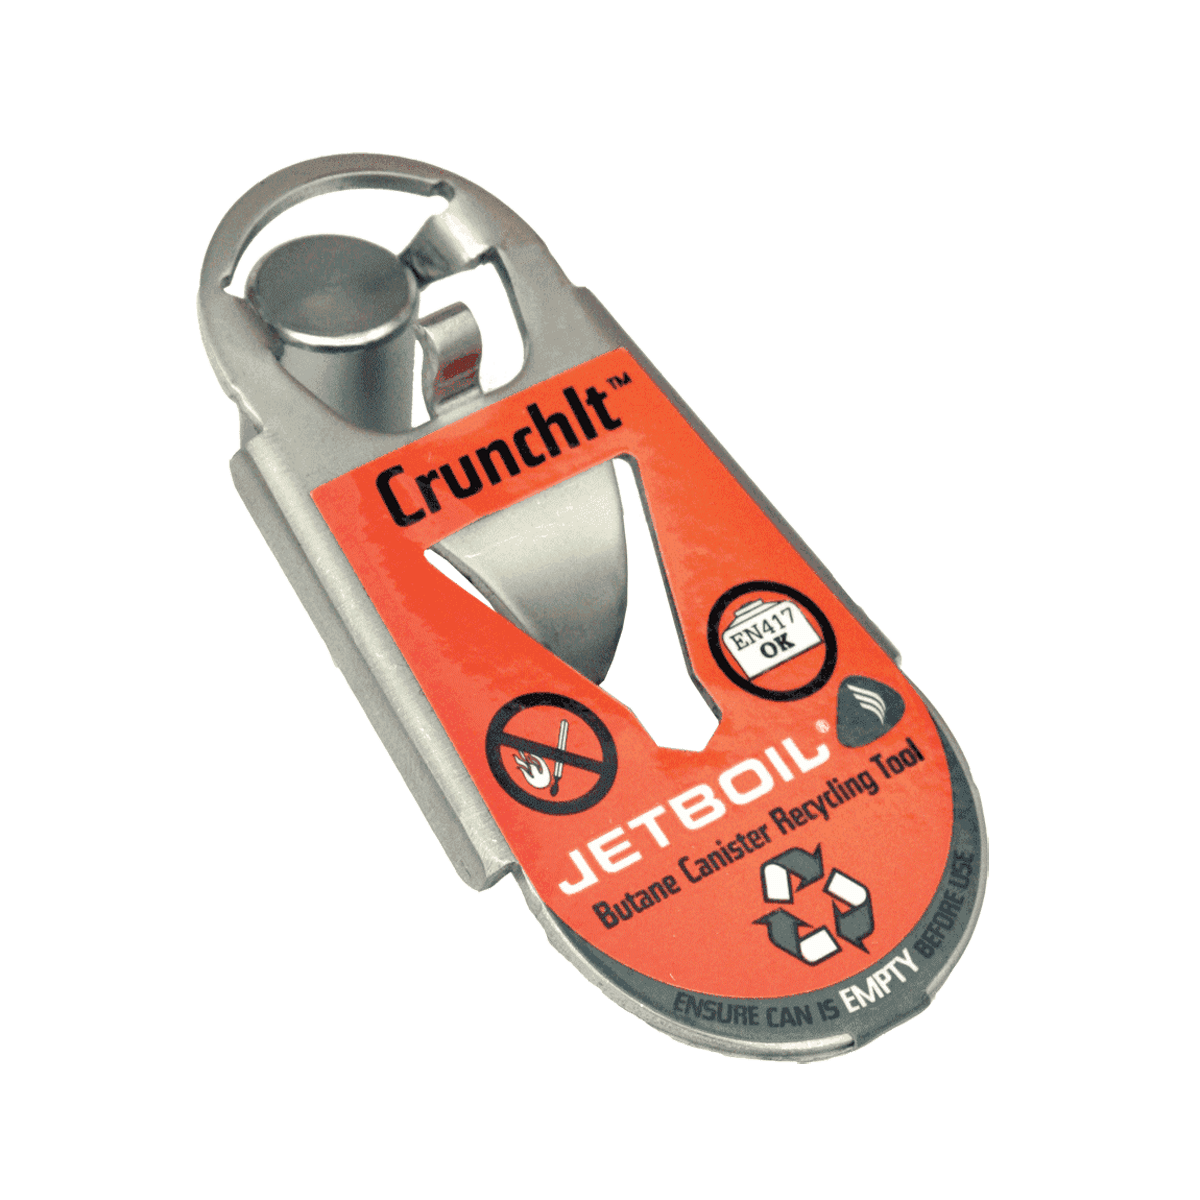 Jetboil CRUNCH IT TOOL